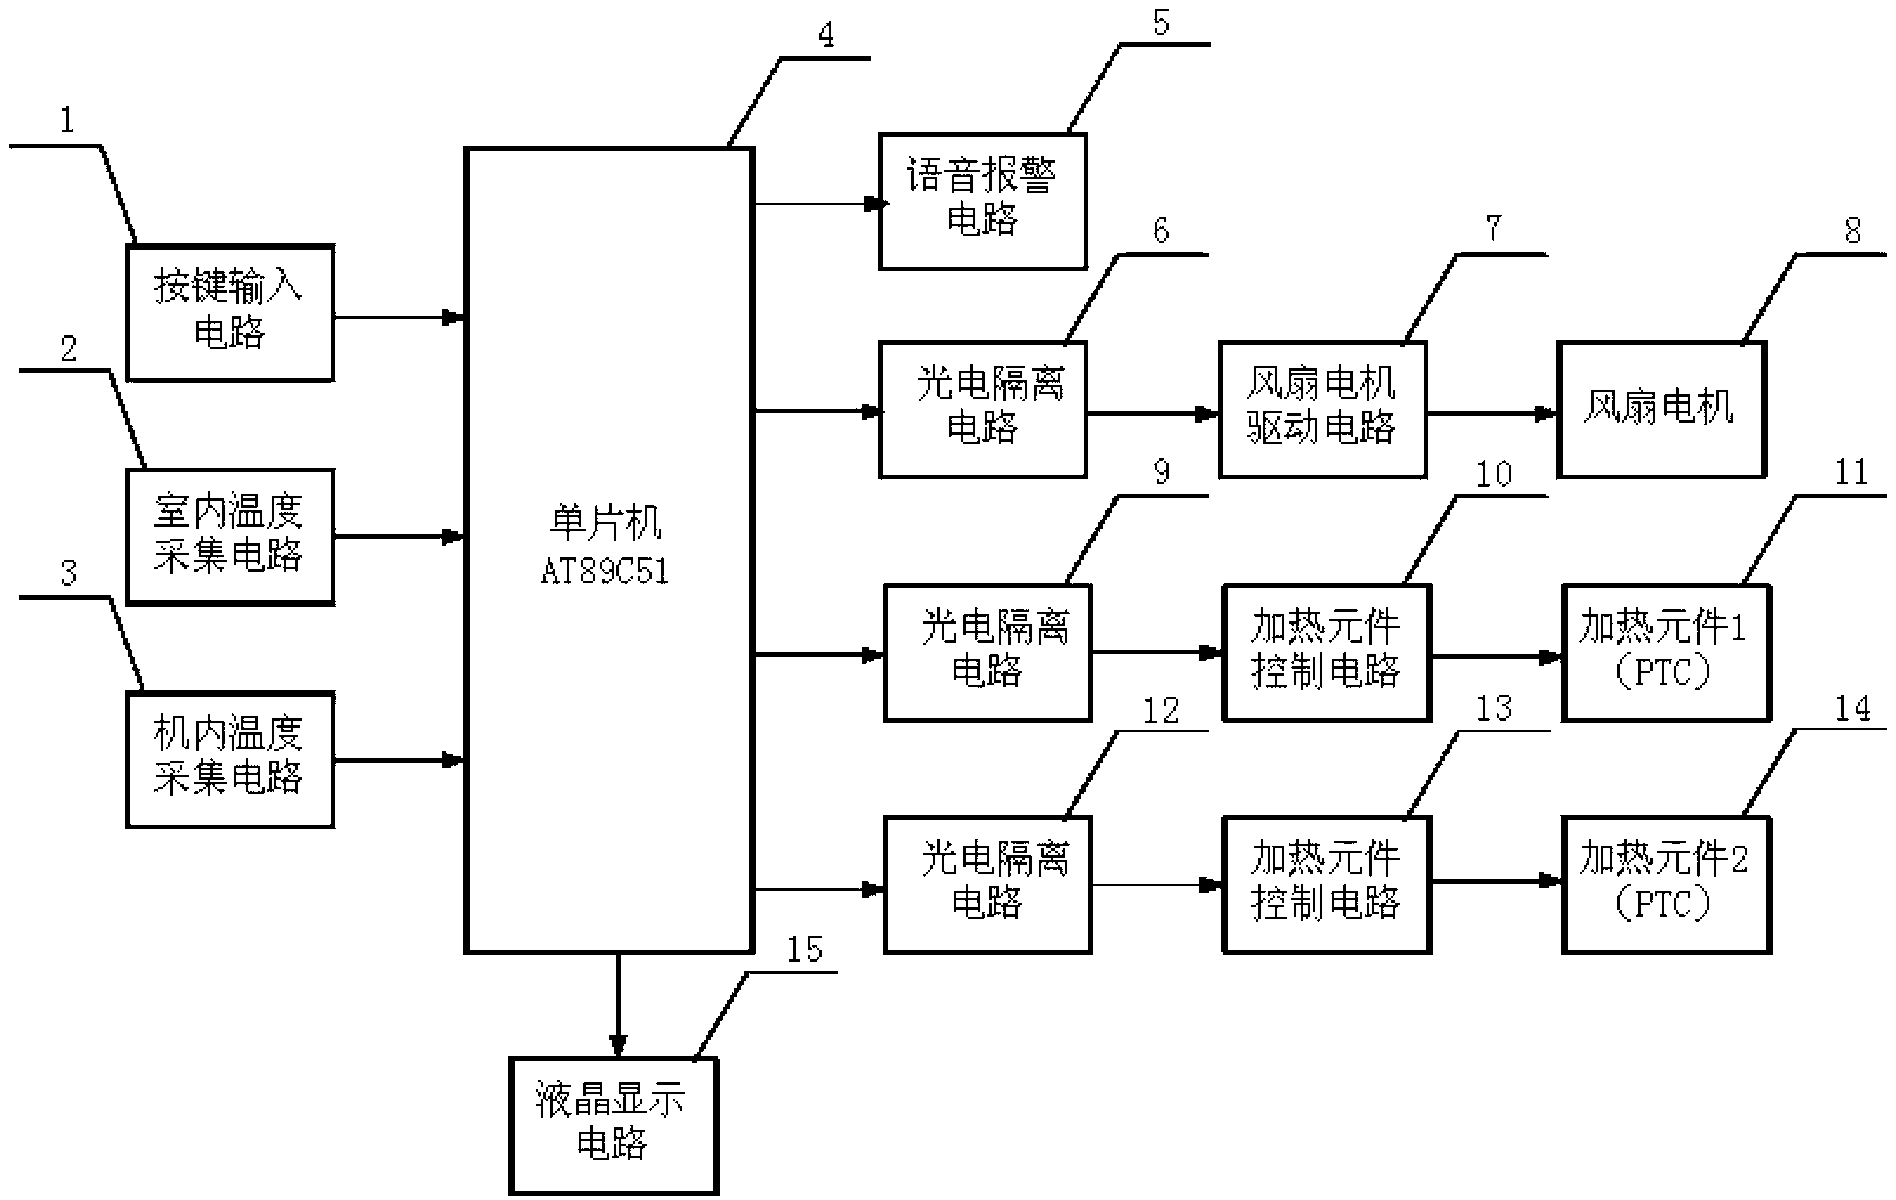 Control device of domestic intelligent electric control fan heater